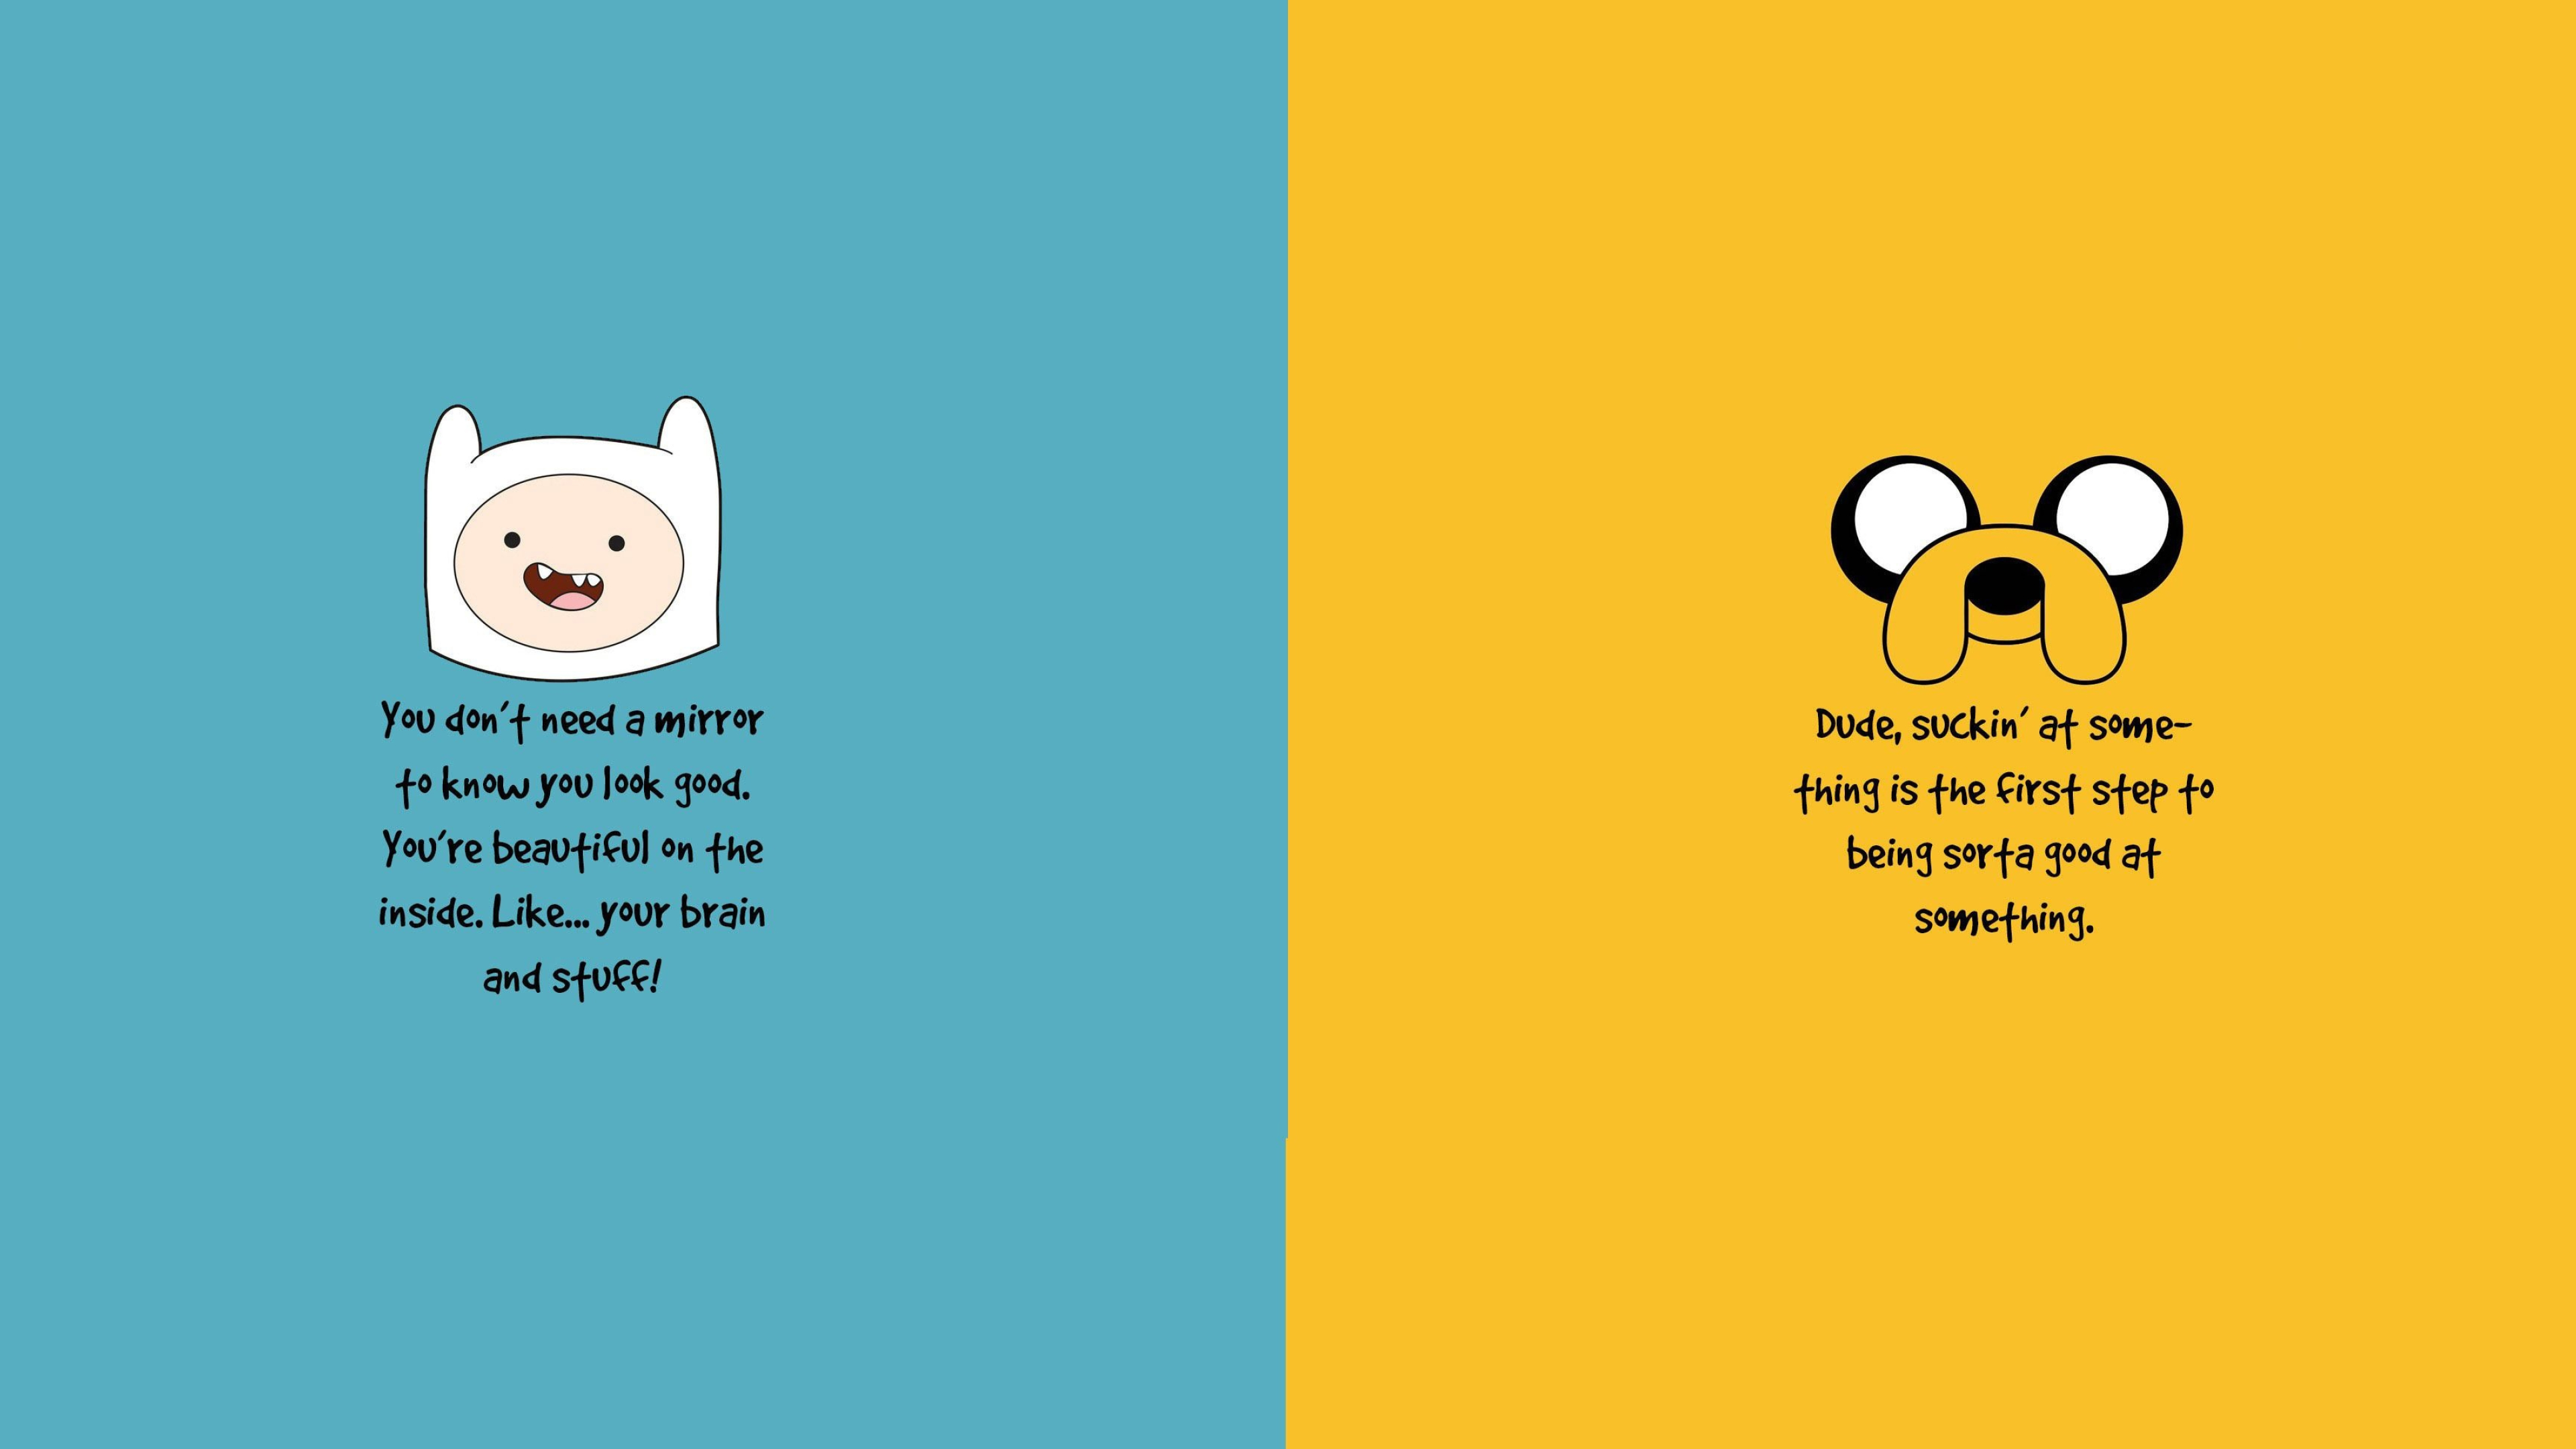 Adventure Time wallpaper, Adventure Time quotes, New adventure quote, Finn and Jake, 3840x2160 4K Desktop